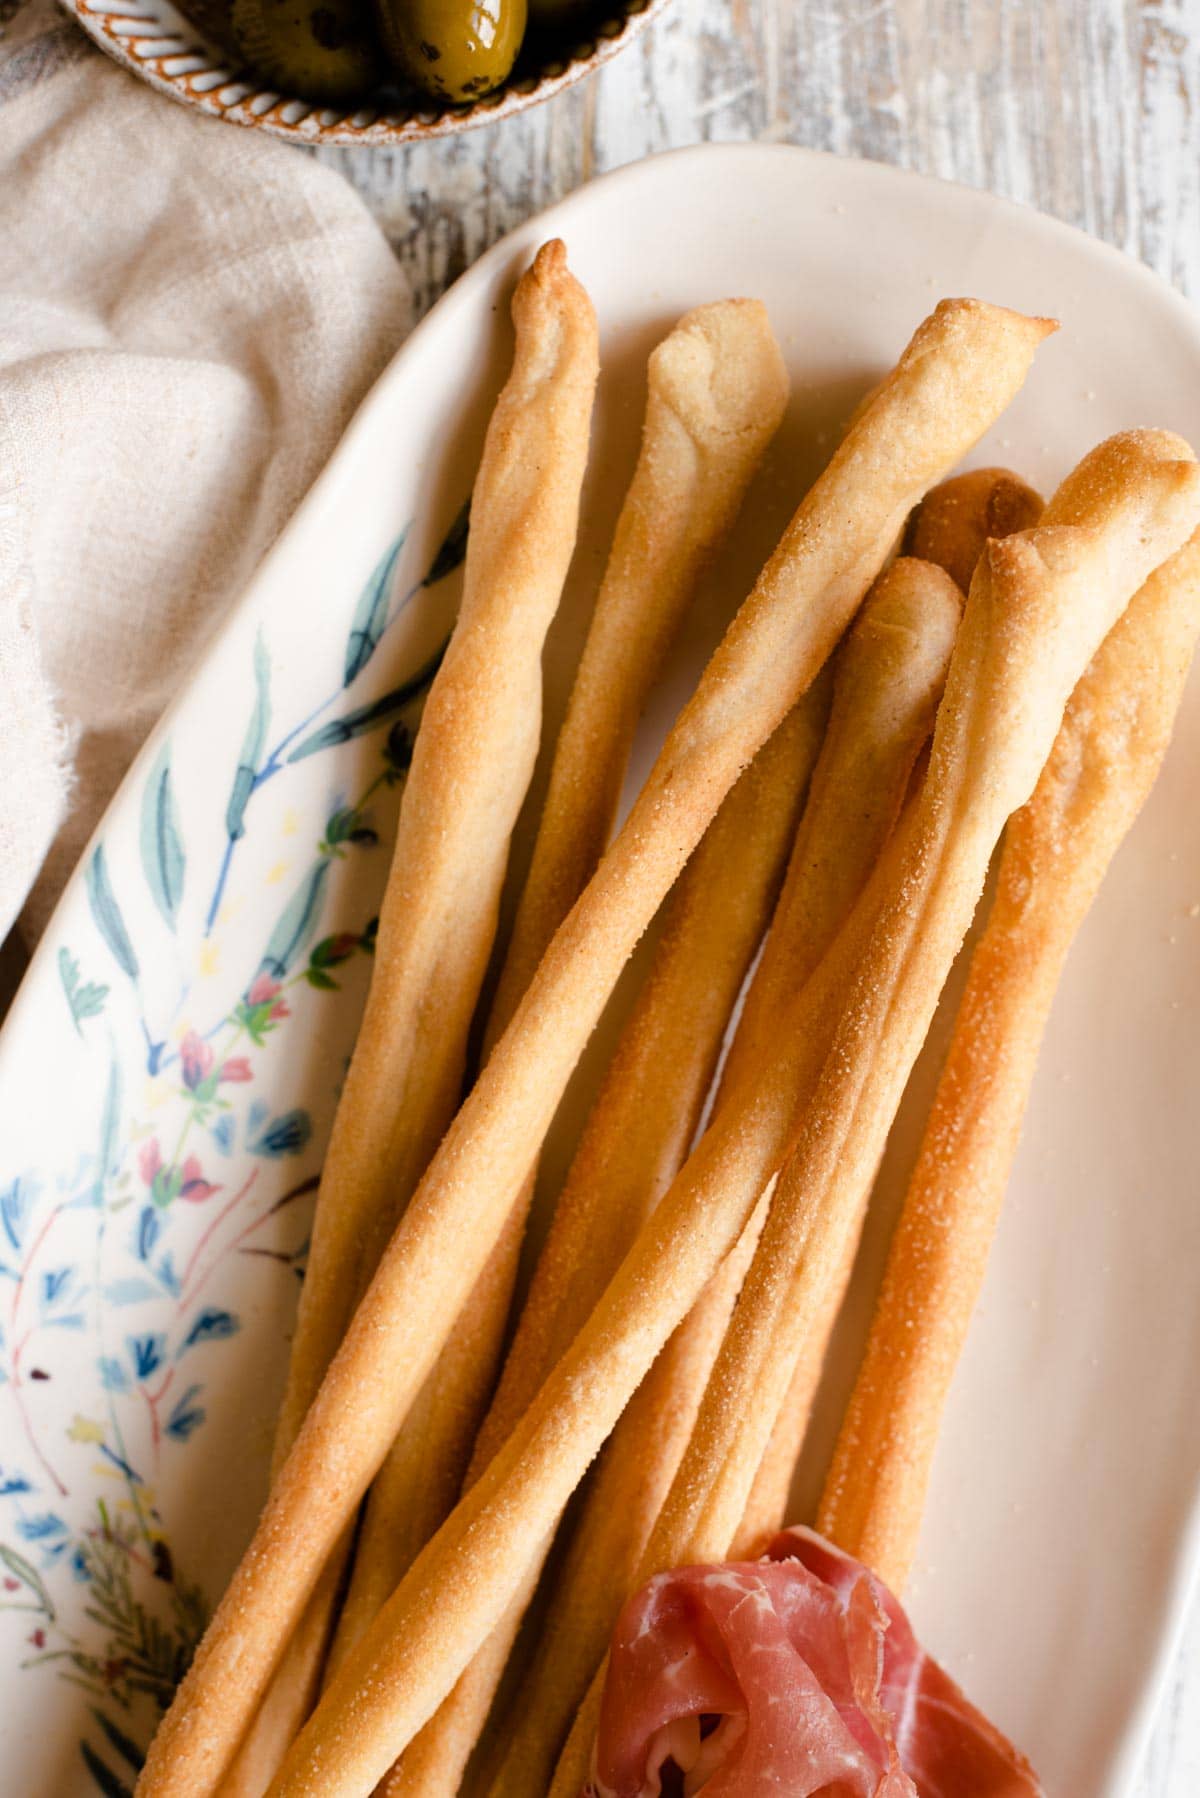 A close up of Italian Grissini breadsticks on a serving plate